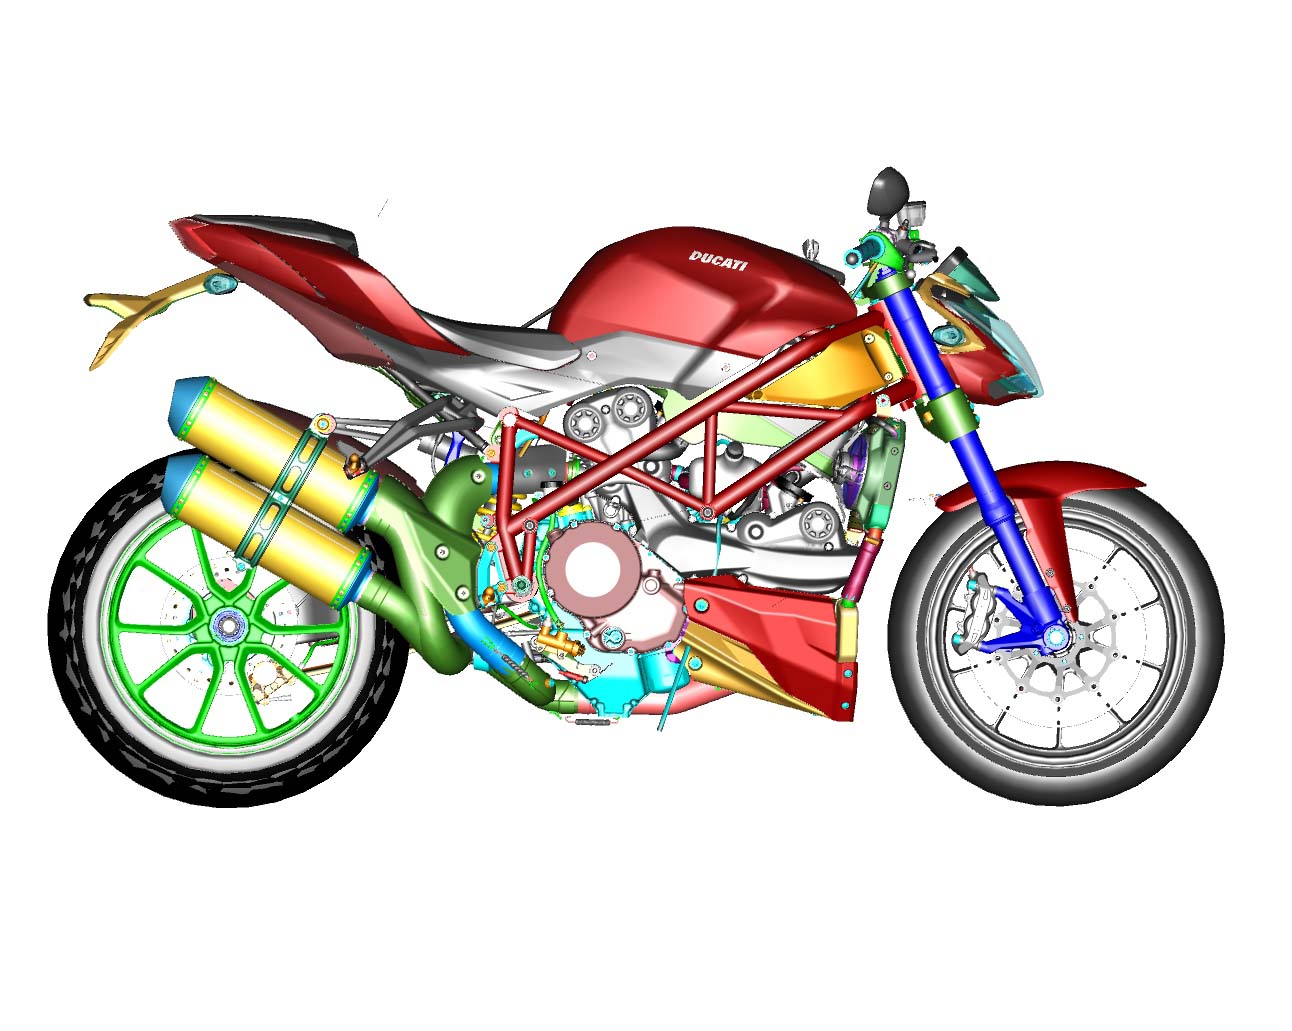 CAD Drawings of the Ducati Streetfighter 848